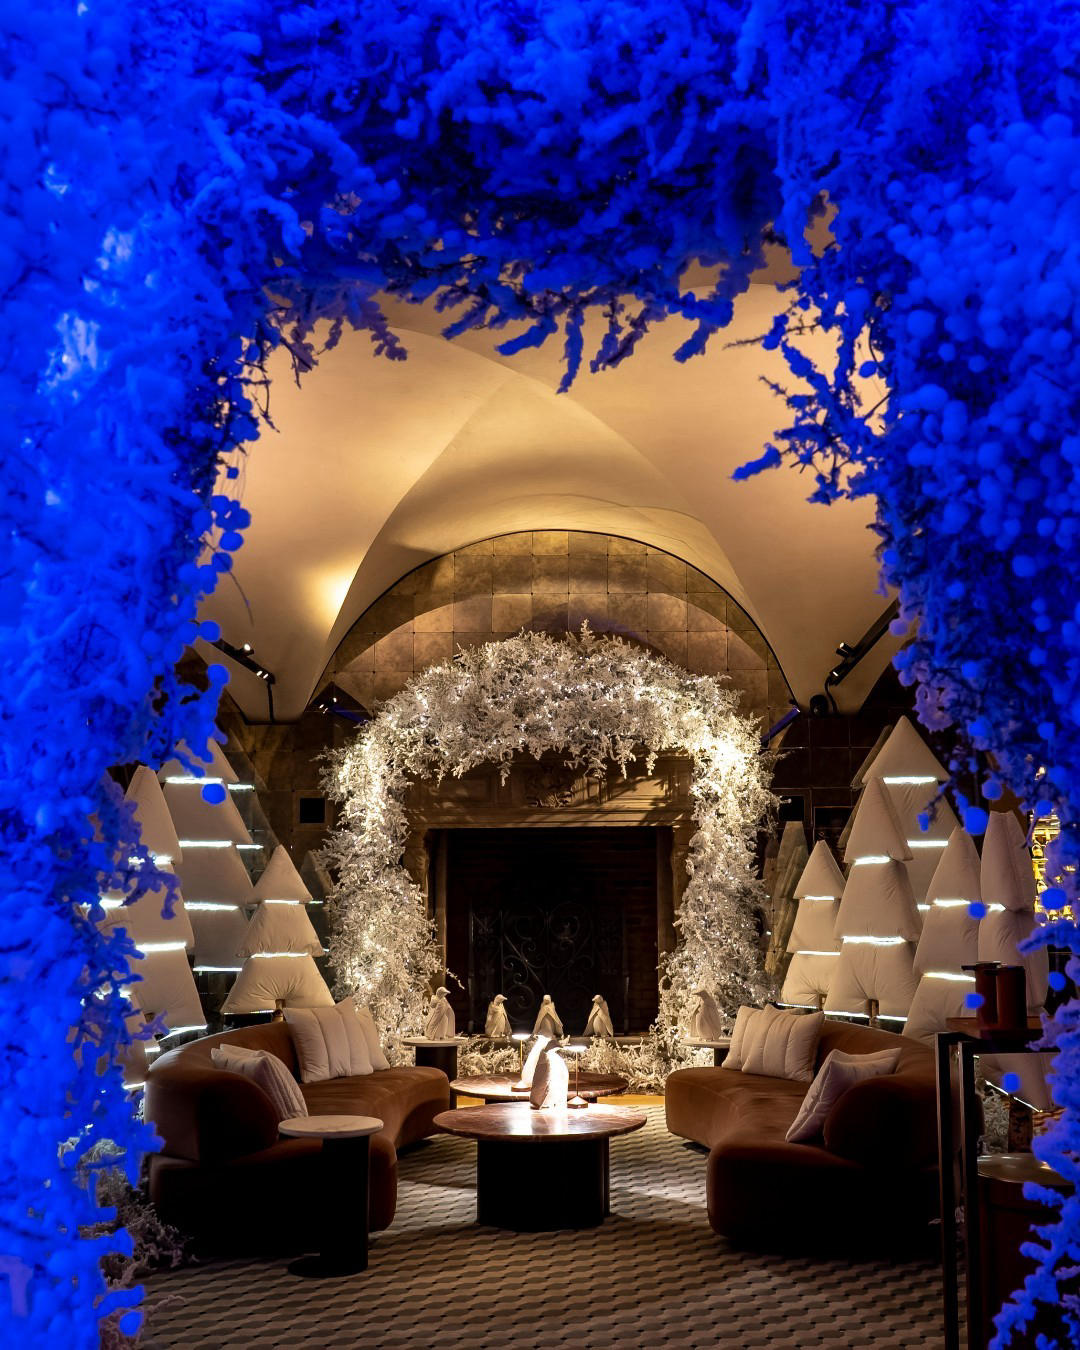 image  1 Four Seasons Hotel Milano - Make it a December to remember